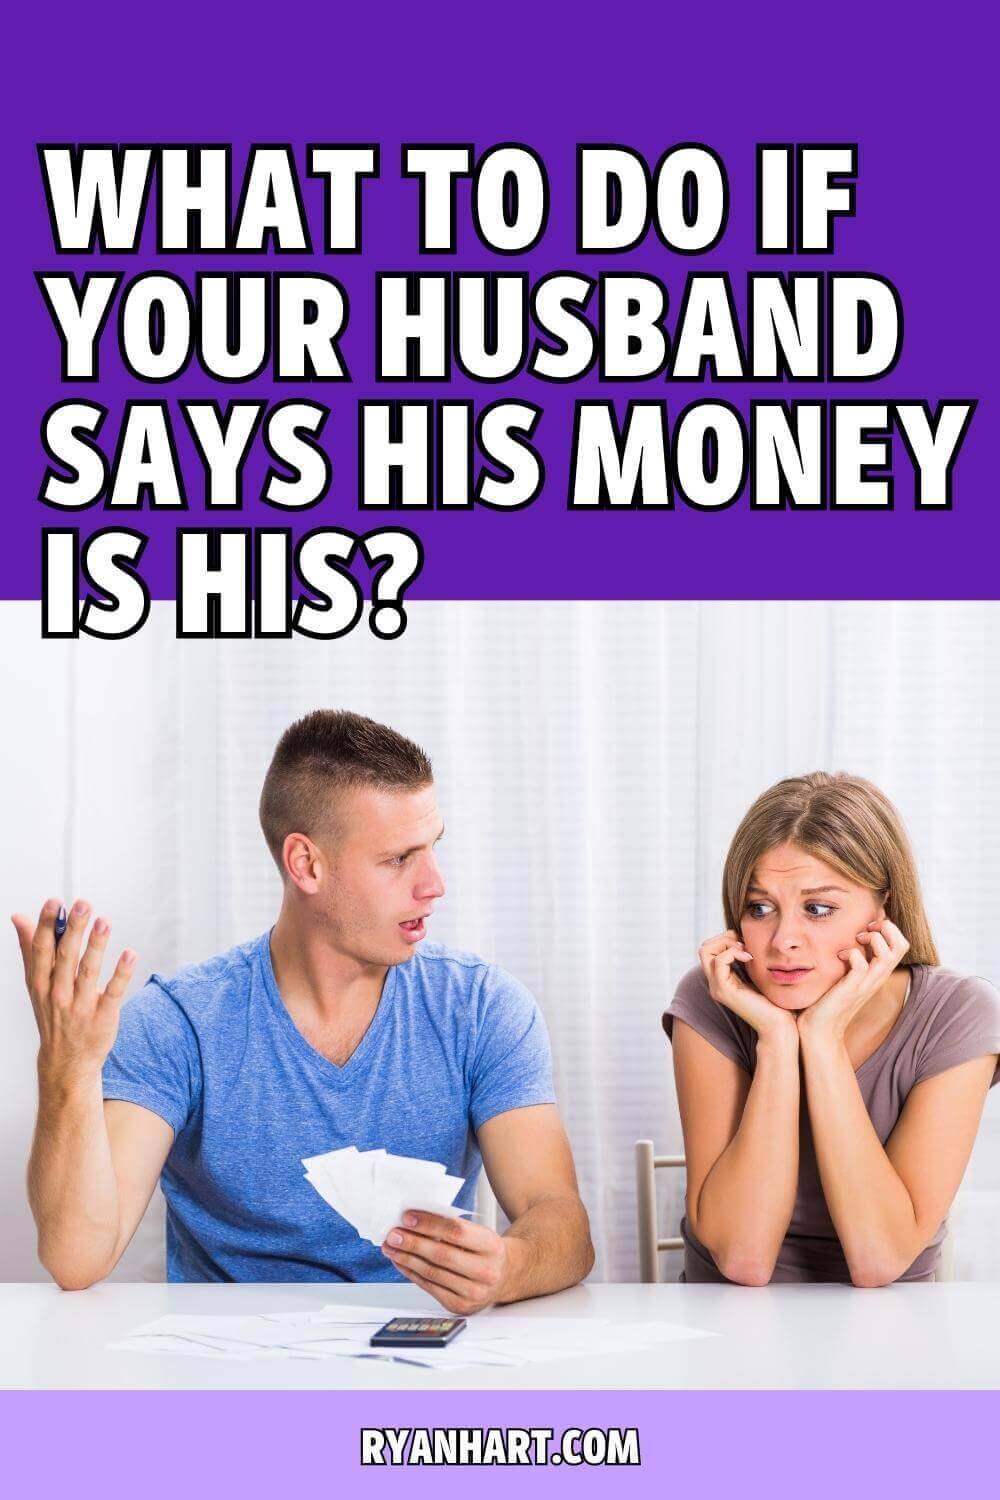 Couple arguing over money